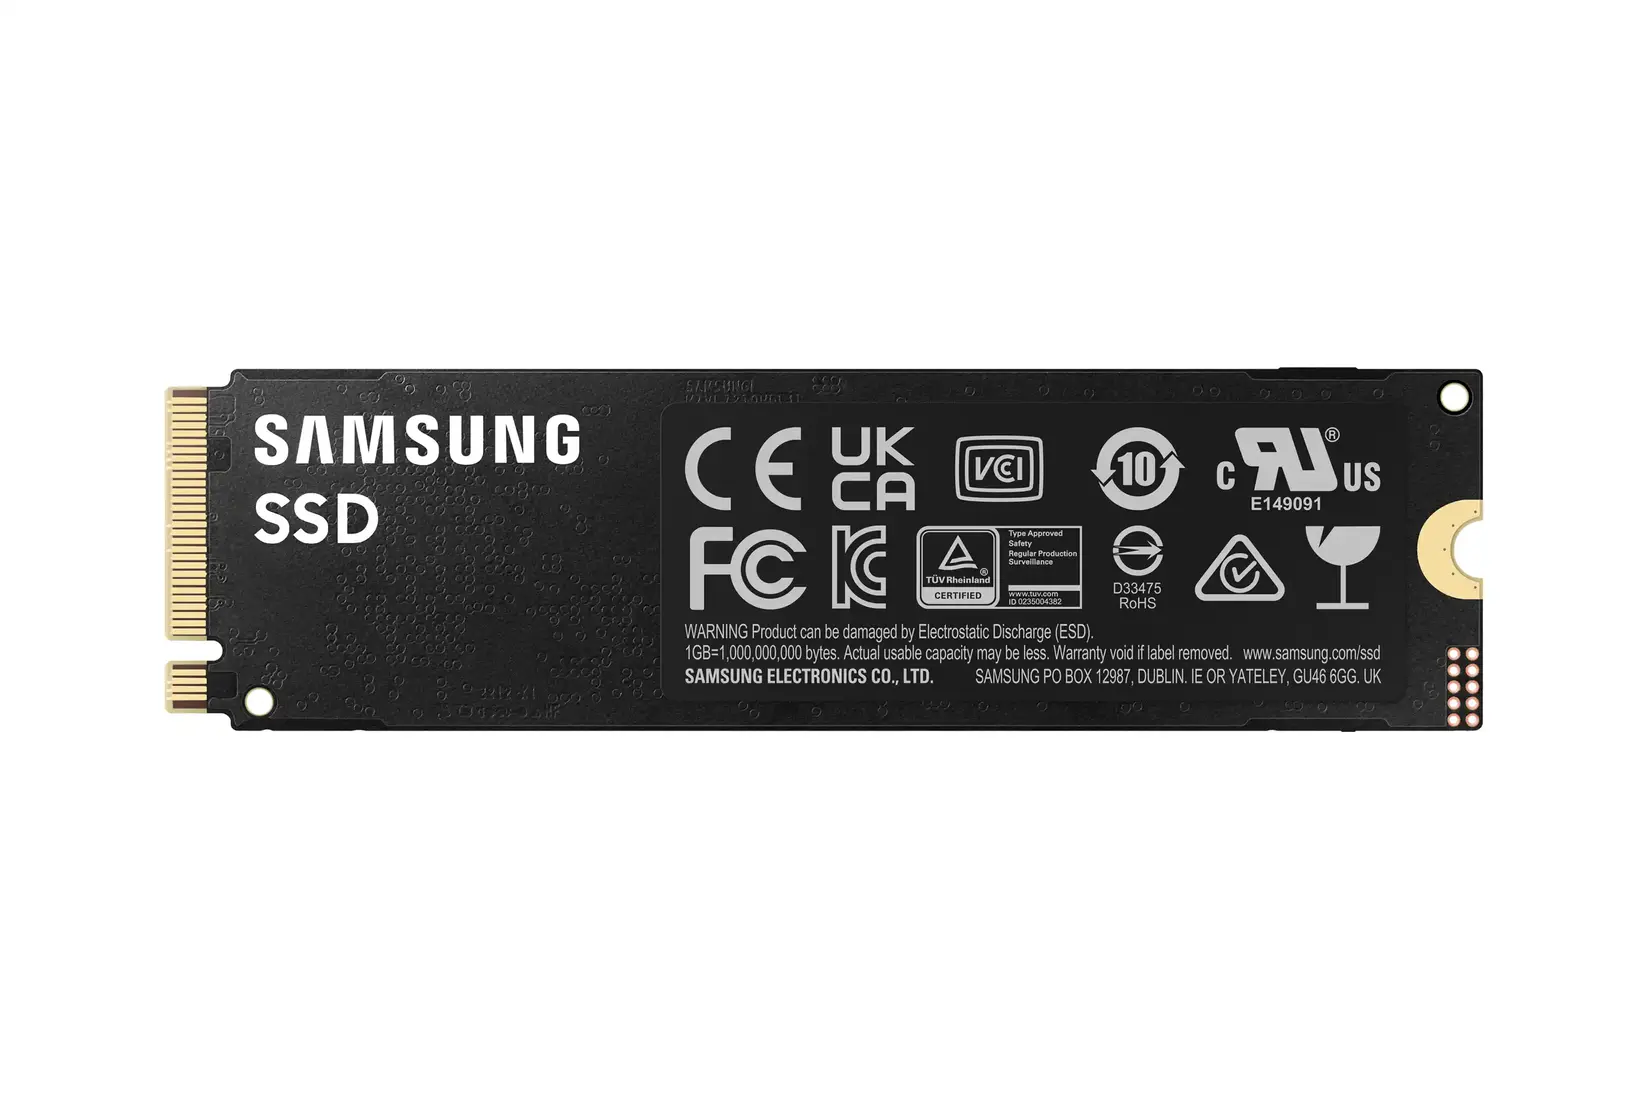 Selected image for SAMSUNG SSD M.2 NVME 1TB 990 pro MZ-V9P1T0BW 7450MBs/6900MBs crni